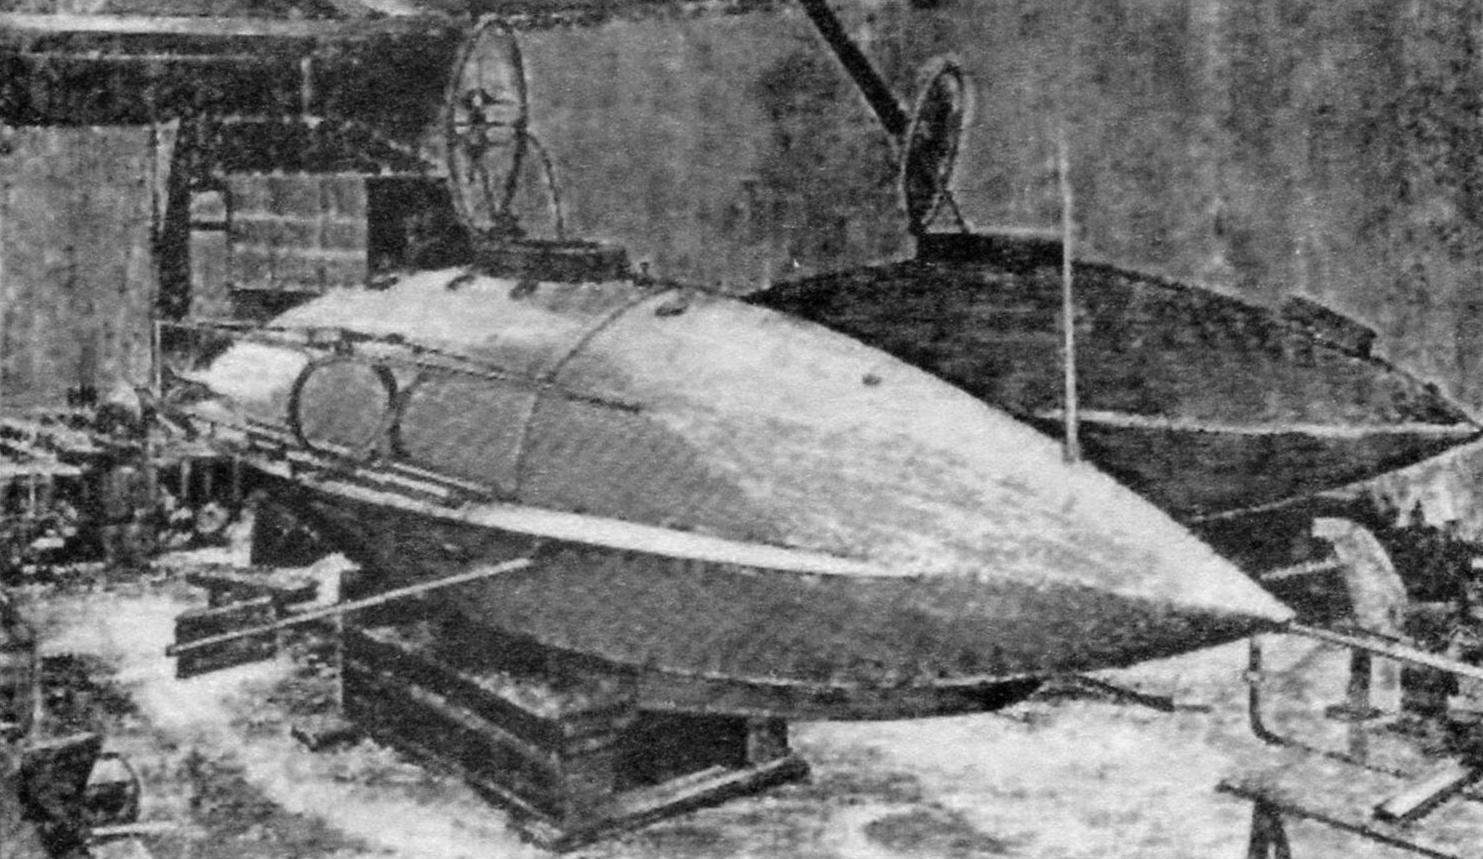 Submarine Guba, 2nd option (in the background of the 1st option)